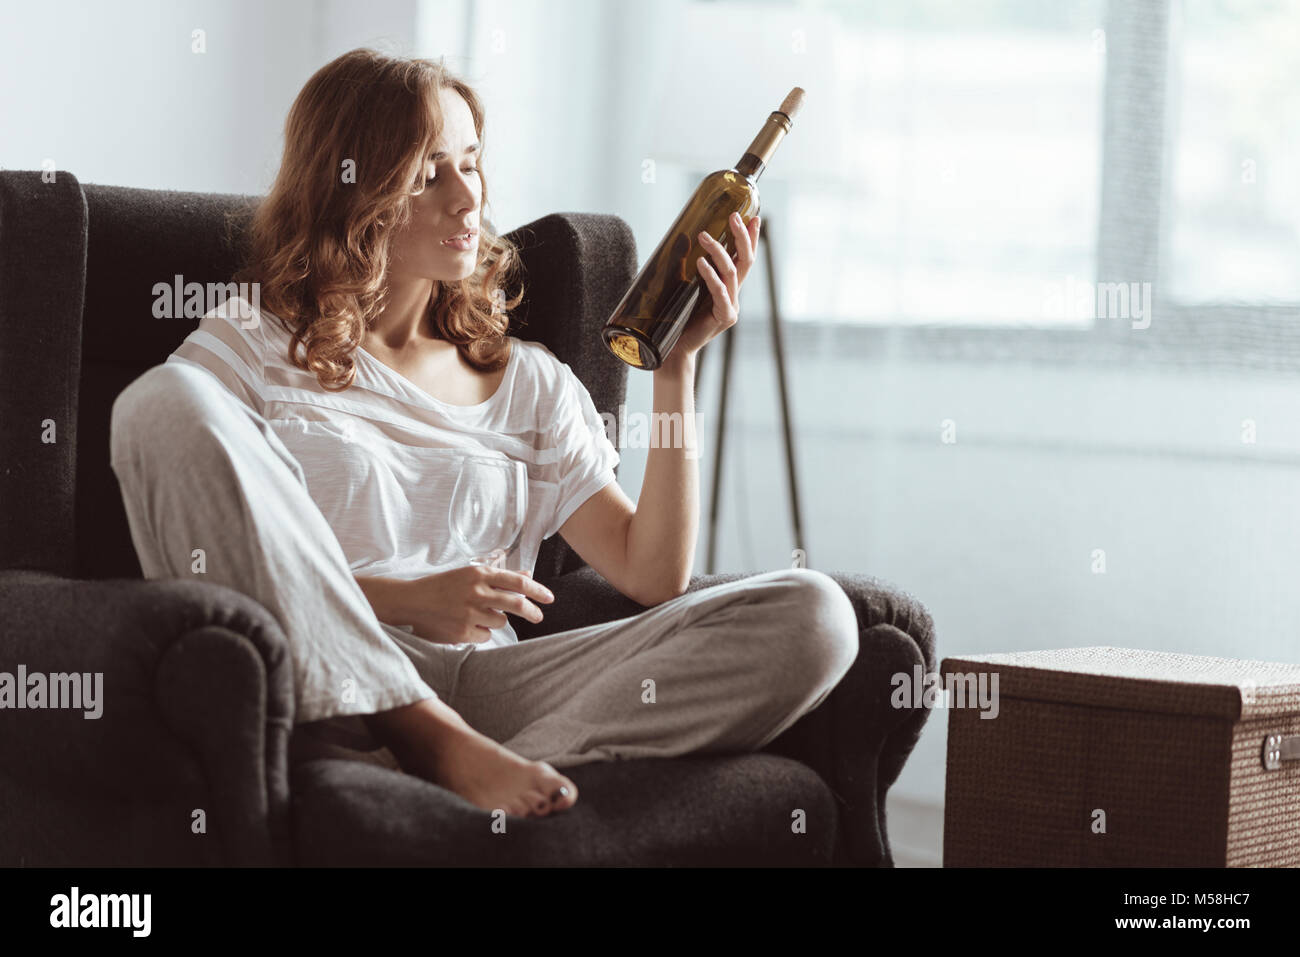 Depressed woman drinking wine at home Stock Photo